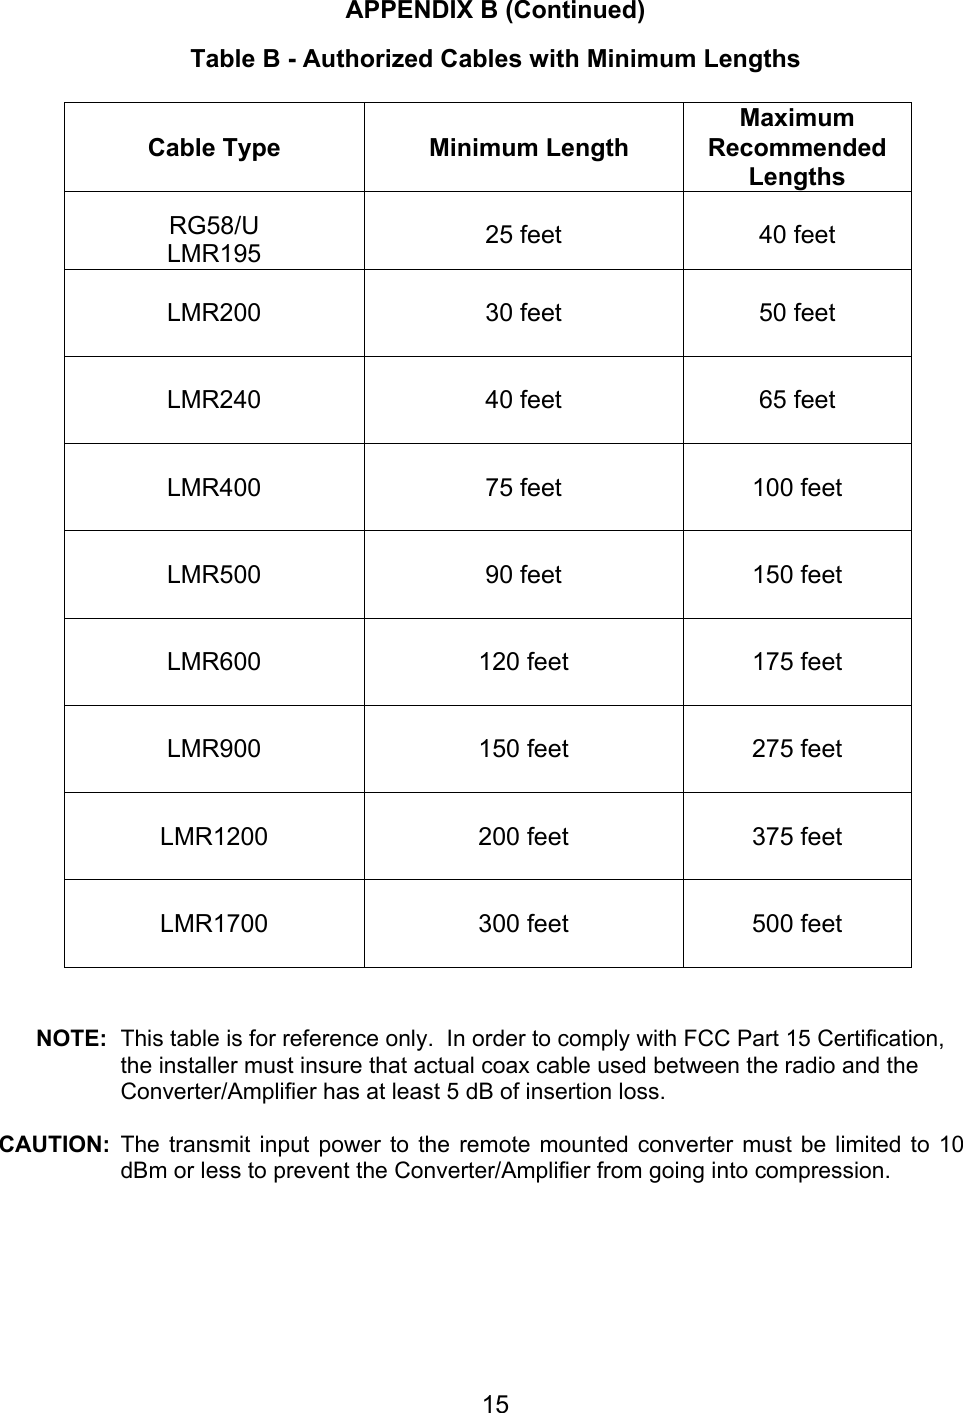  15APPENDIX B (Continued)  Table B - Authorized Cables with Minimum Lengths   Cable Type  Minimum Length Maximum Recommended Lengths  RG58/U LMR195  25 feet  40 feet   LMR200   30 feet  50 feet  LMR240   40 feet  65 feet  LMR400   75 feet  100 feet  LMR500   90 feet  150 feet  LMR600   120 feet  175 feet  LMR900   150 feet  275 feet   LMR1200   200 feet  375 feet  LMR1700   300 feet  500 feet       NOTE:  This table is for reference only.  In order to comply with FCC Part 15 Certification, the installer must insure that actual coax cable used between the radio and the Converter/Amplifier has at least 5 dB of insertion loss.  CAUTION: The transmit input power to the remote mounted converter must be limited to 10 dBm or less to prevent the Converter/Amplifier from going into compression. 